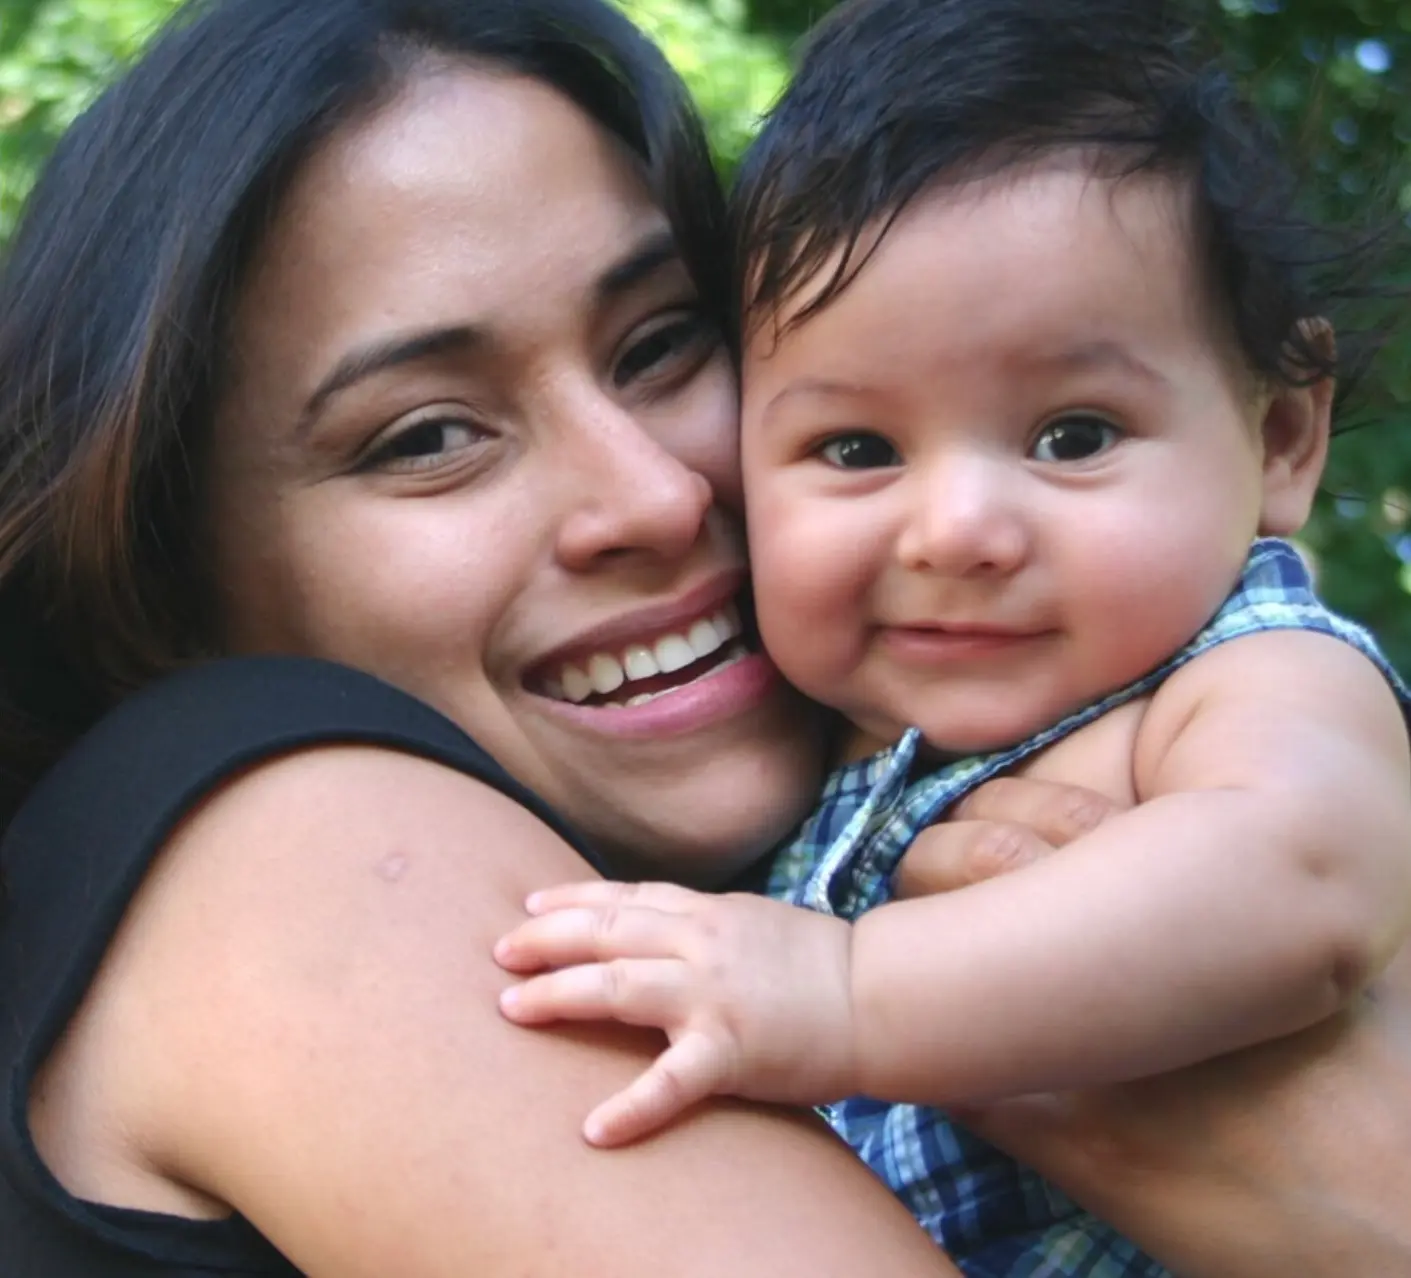 A Latina mother smiling and holding her baby boy close.